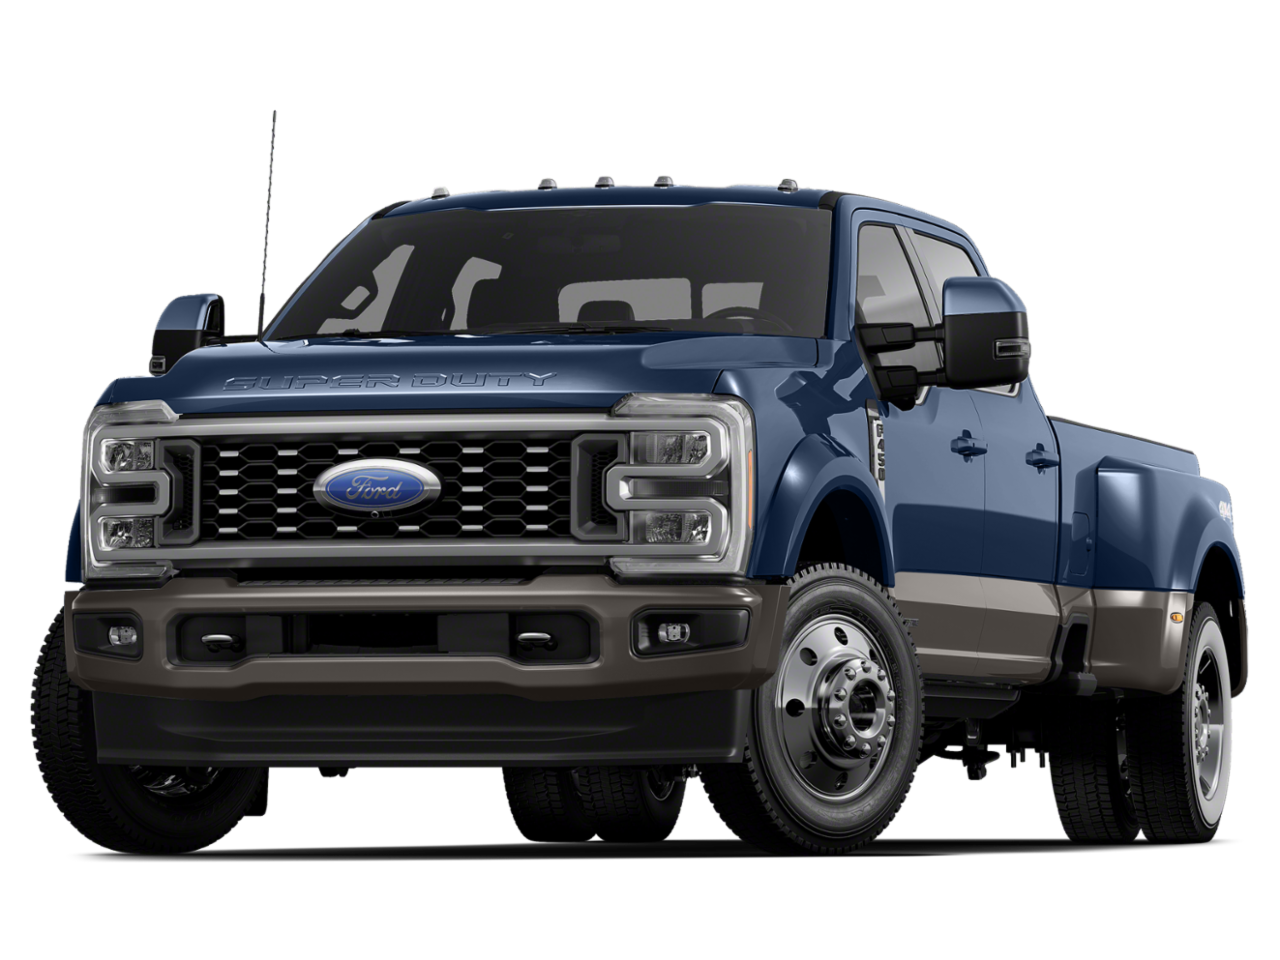 2021 Ford F-Series Super Duty trucks recalled over wheels that can fall off  - CNET